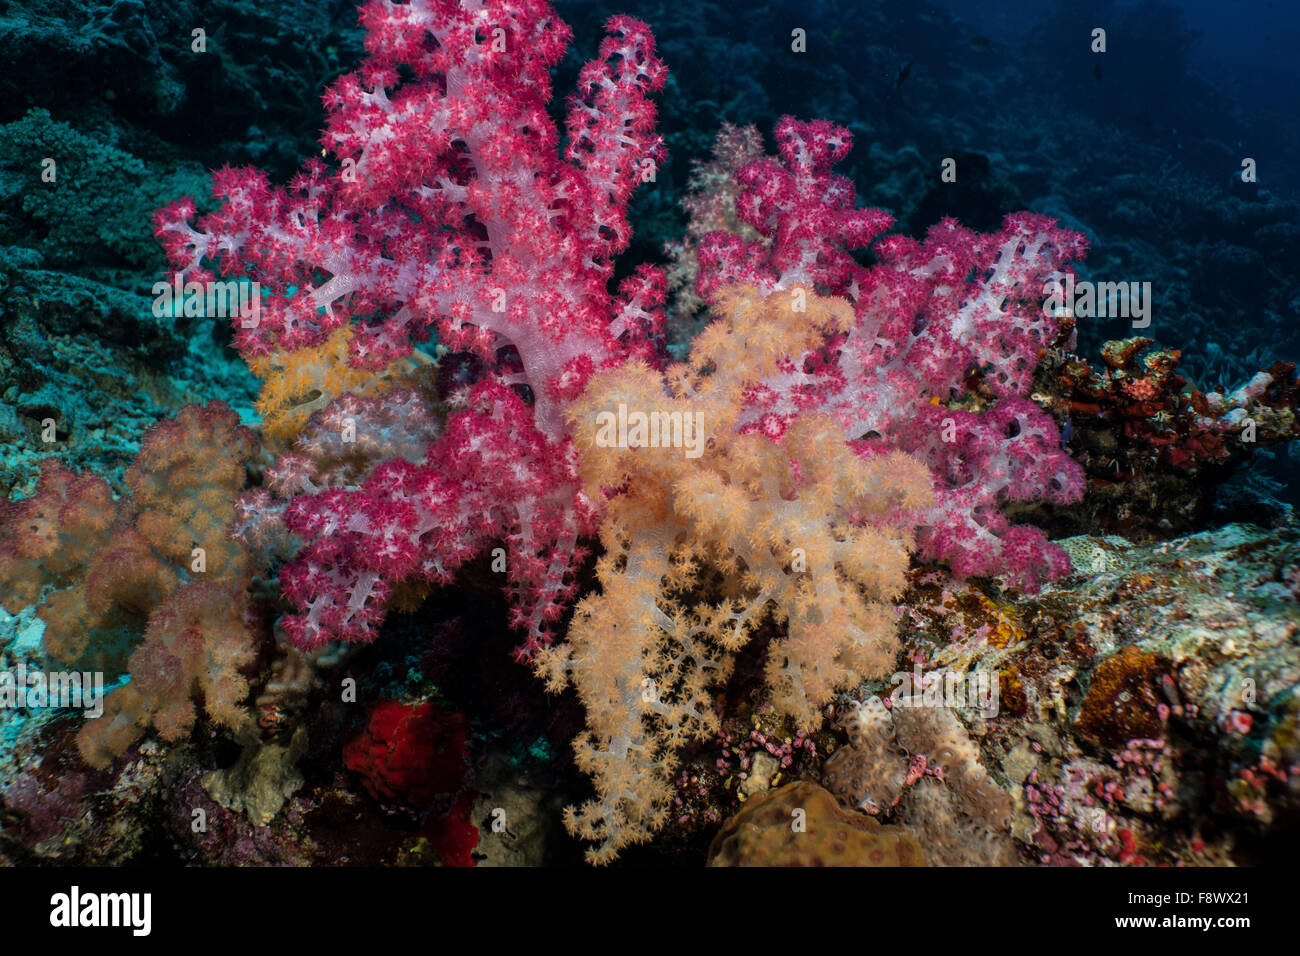 Colorful reef scene with Soft corals. Stock Photo